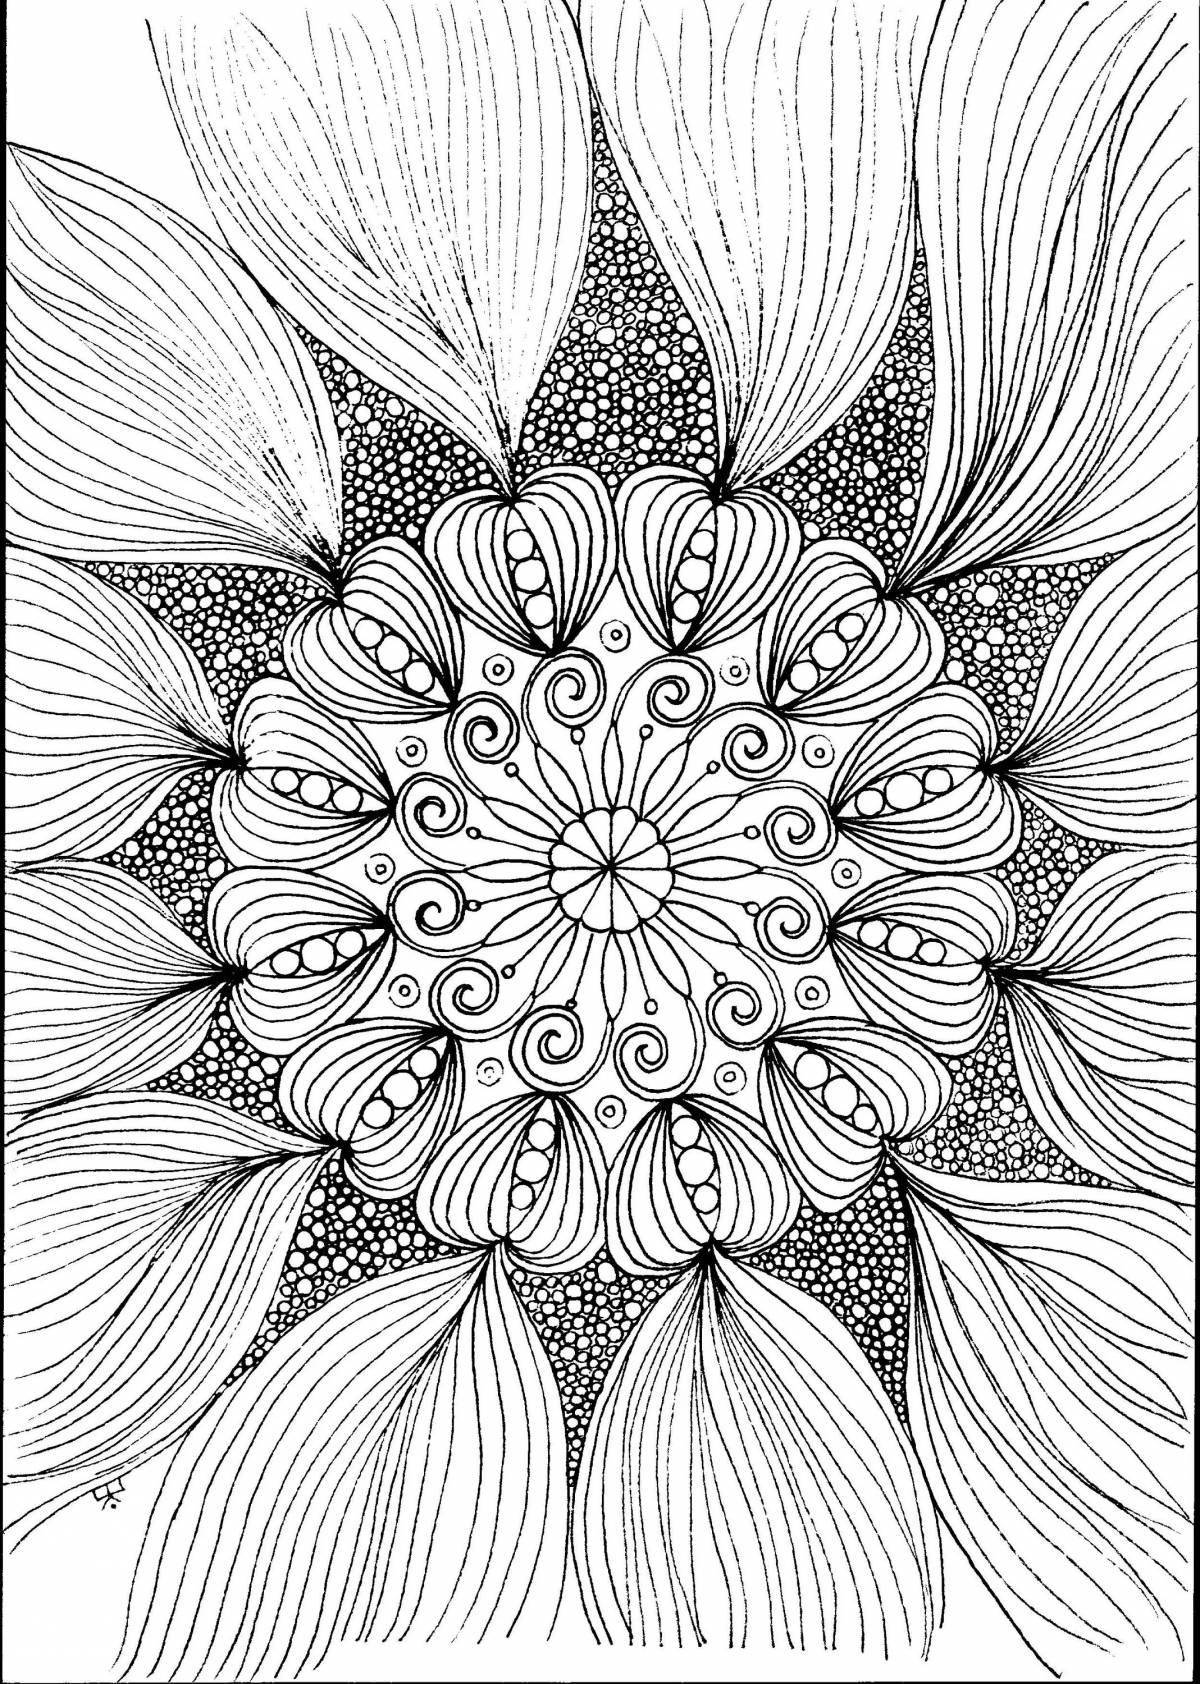 Radiant coloring page for meditation and relaxation